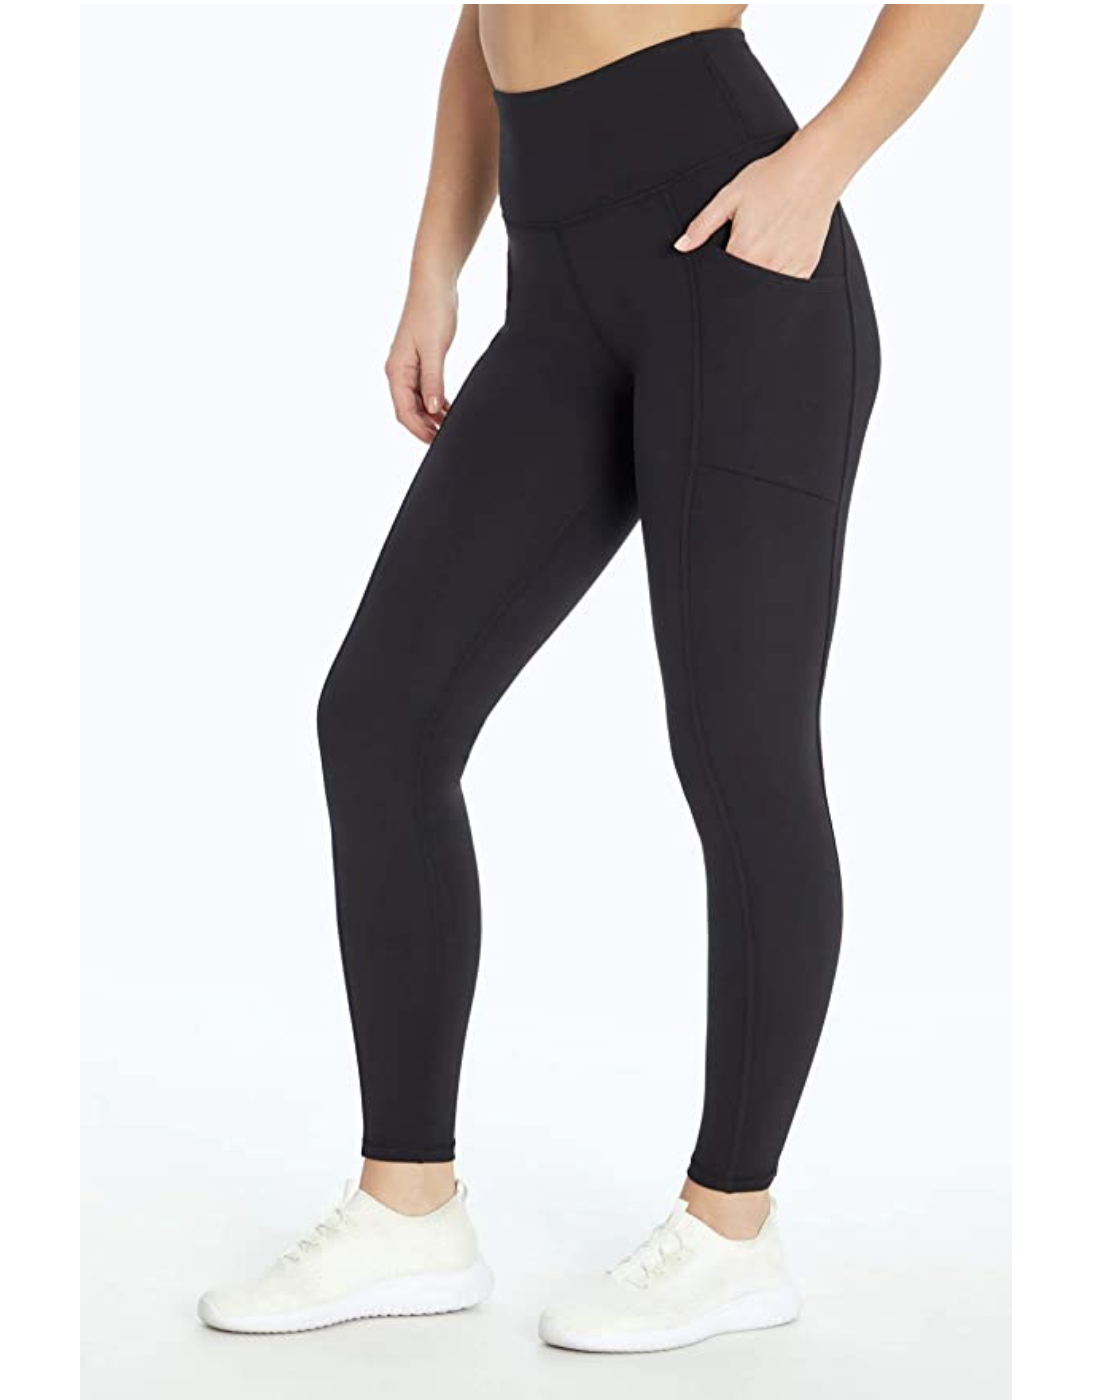 Women's Marika Leggings: Find the Yoga Apparel You Need for Your Wardrobe |  Kohl's